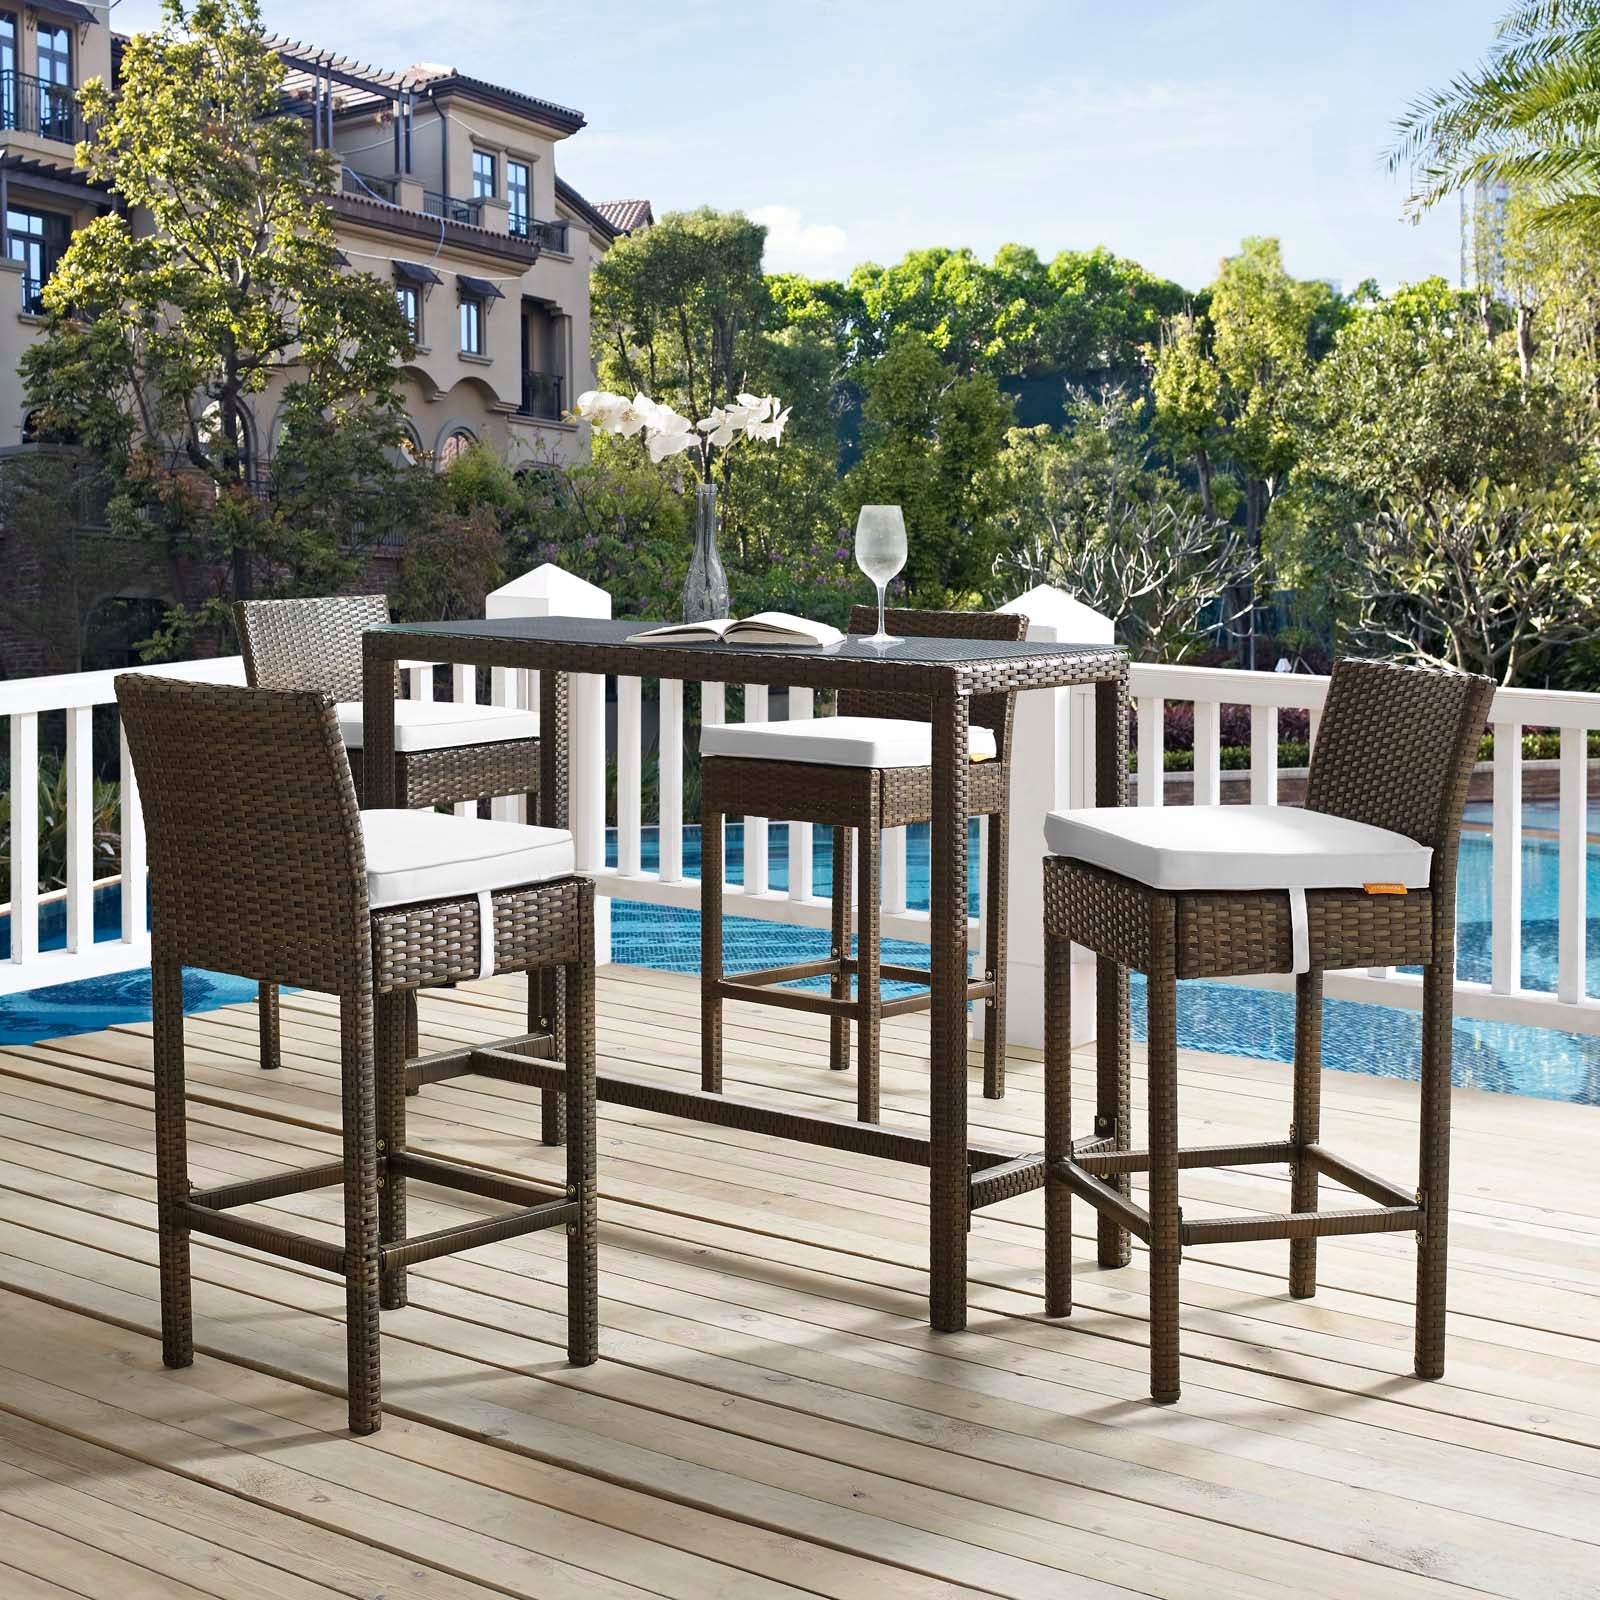 Modway Outdoor Barstools - Conduit Bar Stool Outdoor Patio Wicker Rattan Set of 4 Brown White